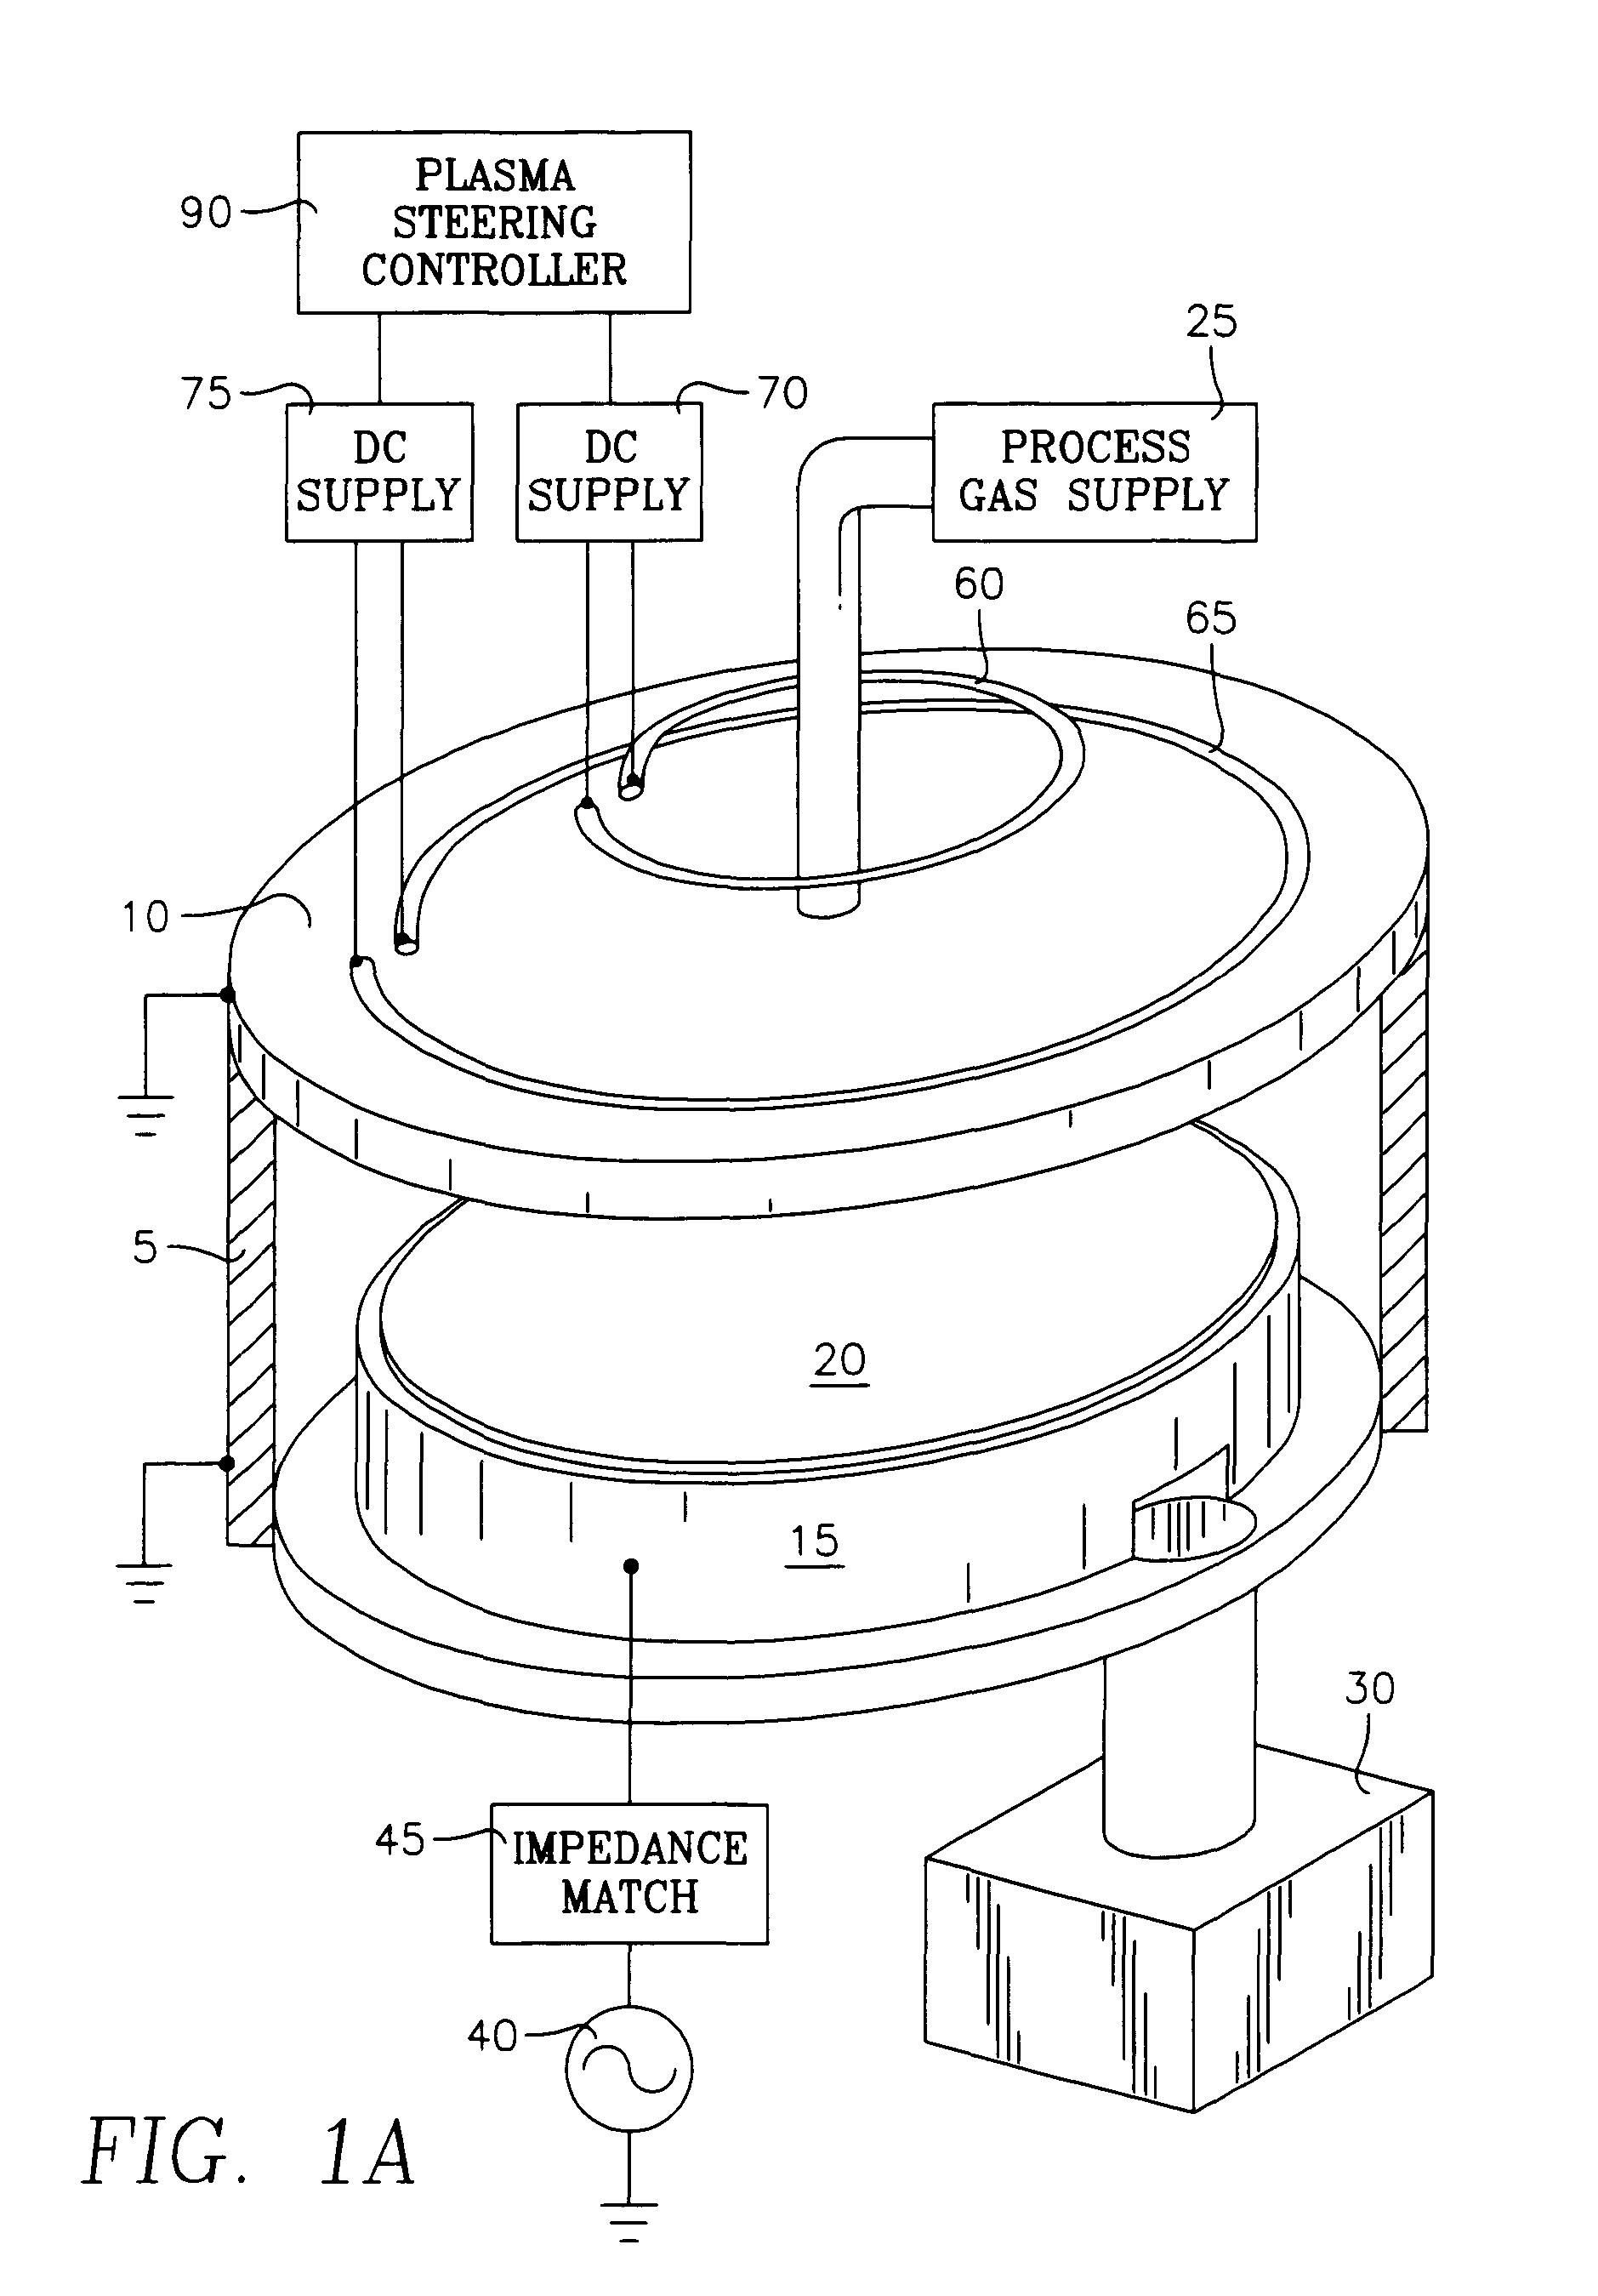 Plasma reactor with minimal D.C. coils for cusp, solenoid and mirror fields for plasma uniformity and device damage reduction